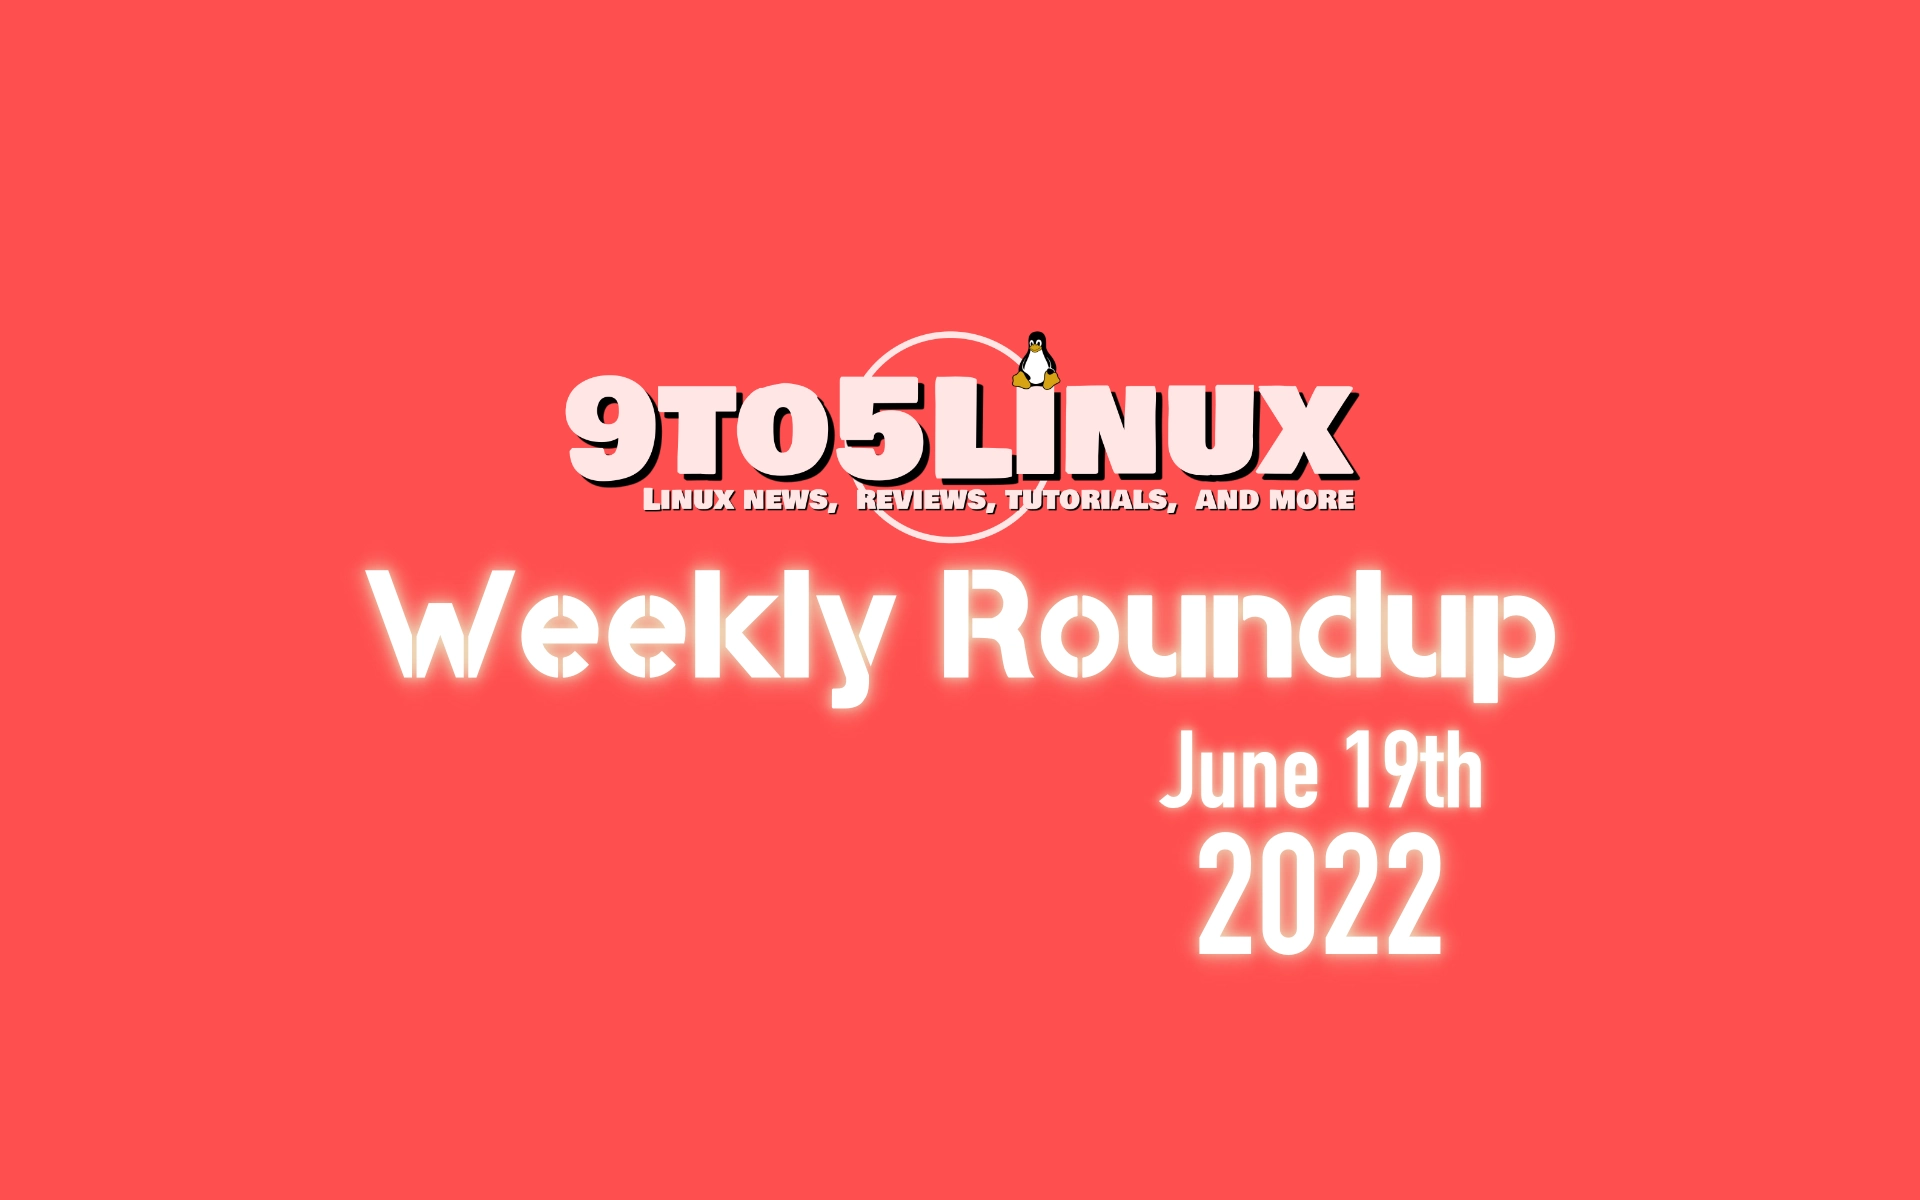 9to5Linux Weekly Roundup: June 19th, 2022